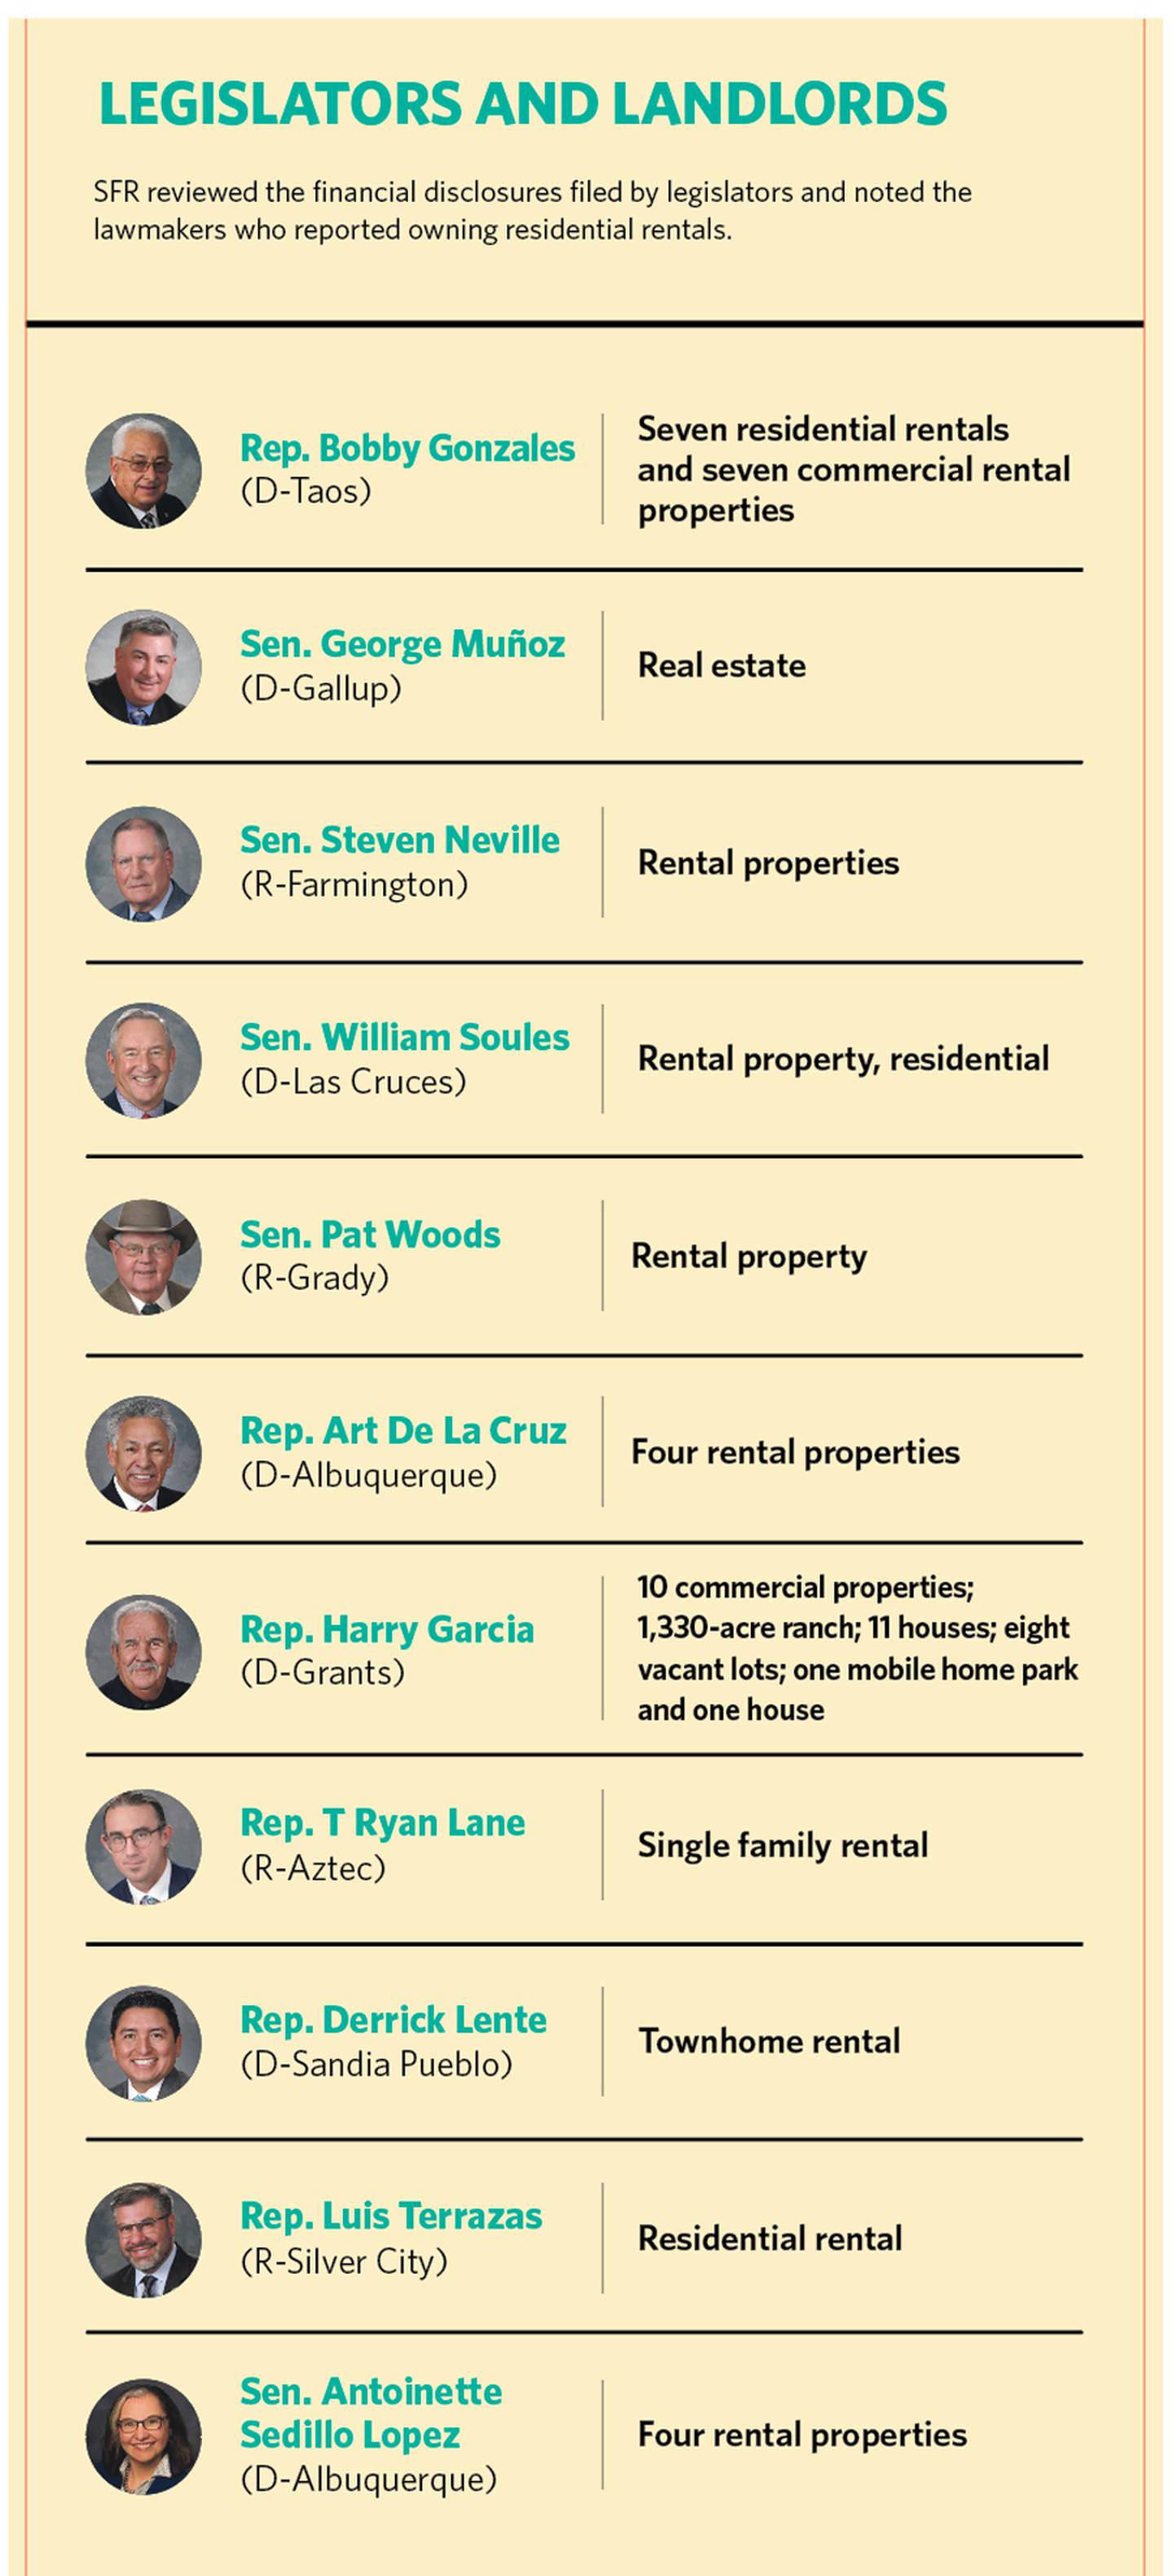 Legislators and Landlords - 
SFR reviewed the financial disclosures filed by legislators and noted the lawmakers who reported owning residential rentals. 
Rep. Bobby Gonzales (D-Taos): Seven residential rentals and seven commercial rental properties;
Sen. George Muñoz (D-Gallup): Real estate;
Sen. Steven Neville (R-Farmington): Rental properties;
Sen. William Soules (D-Las Cruces): Rental property, residential;
Sen. Pat Woods (R-Grady): Rental property;
Rep. Art De La Cruz (D-Albuquerque): Four rental properties;
Rep. Harry Garcia (D-Grants): 10 commercial properties, 1,330-acre ranch, 11 houses, eight vacant lots, one mobile home park and one house;
Rep. T Ryan Lane (R-Aztec): Single family rental;
Rep. Derrick Lente (D-Sandia Pueblo): Townhome rental;
Rep. Luis Terrazas (R-Silver City): Residential rental;
Sen. Antoinette Sedillo Lopez (D-Albuquerque) Four rental properties